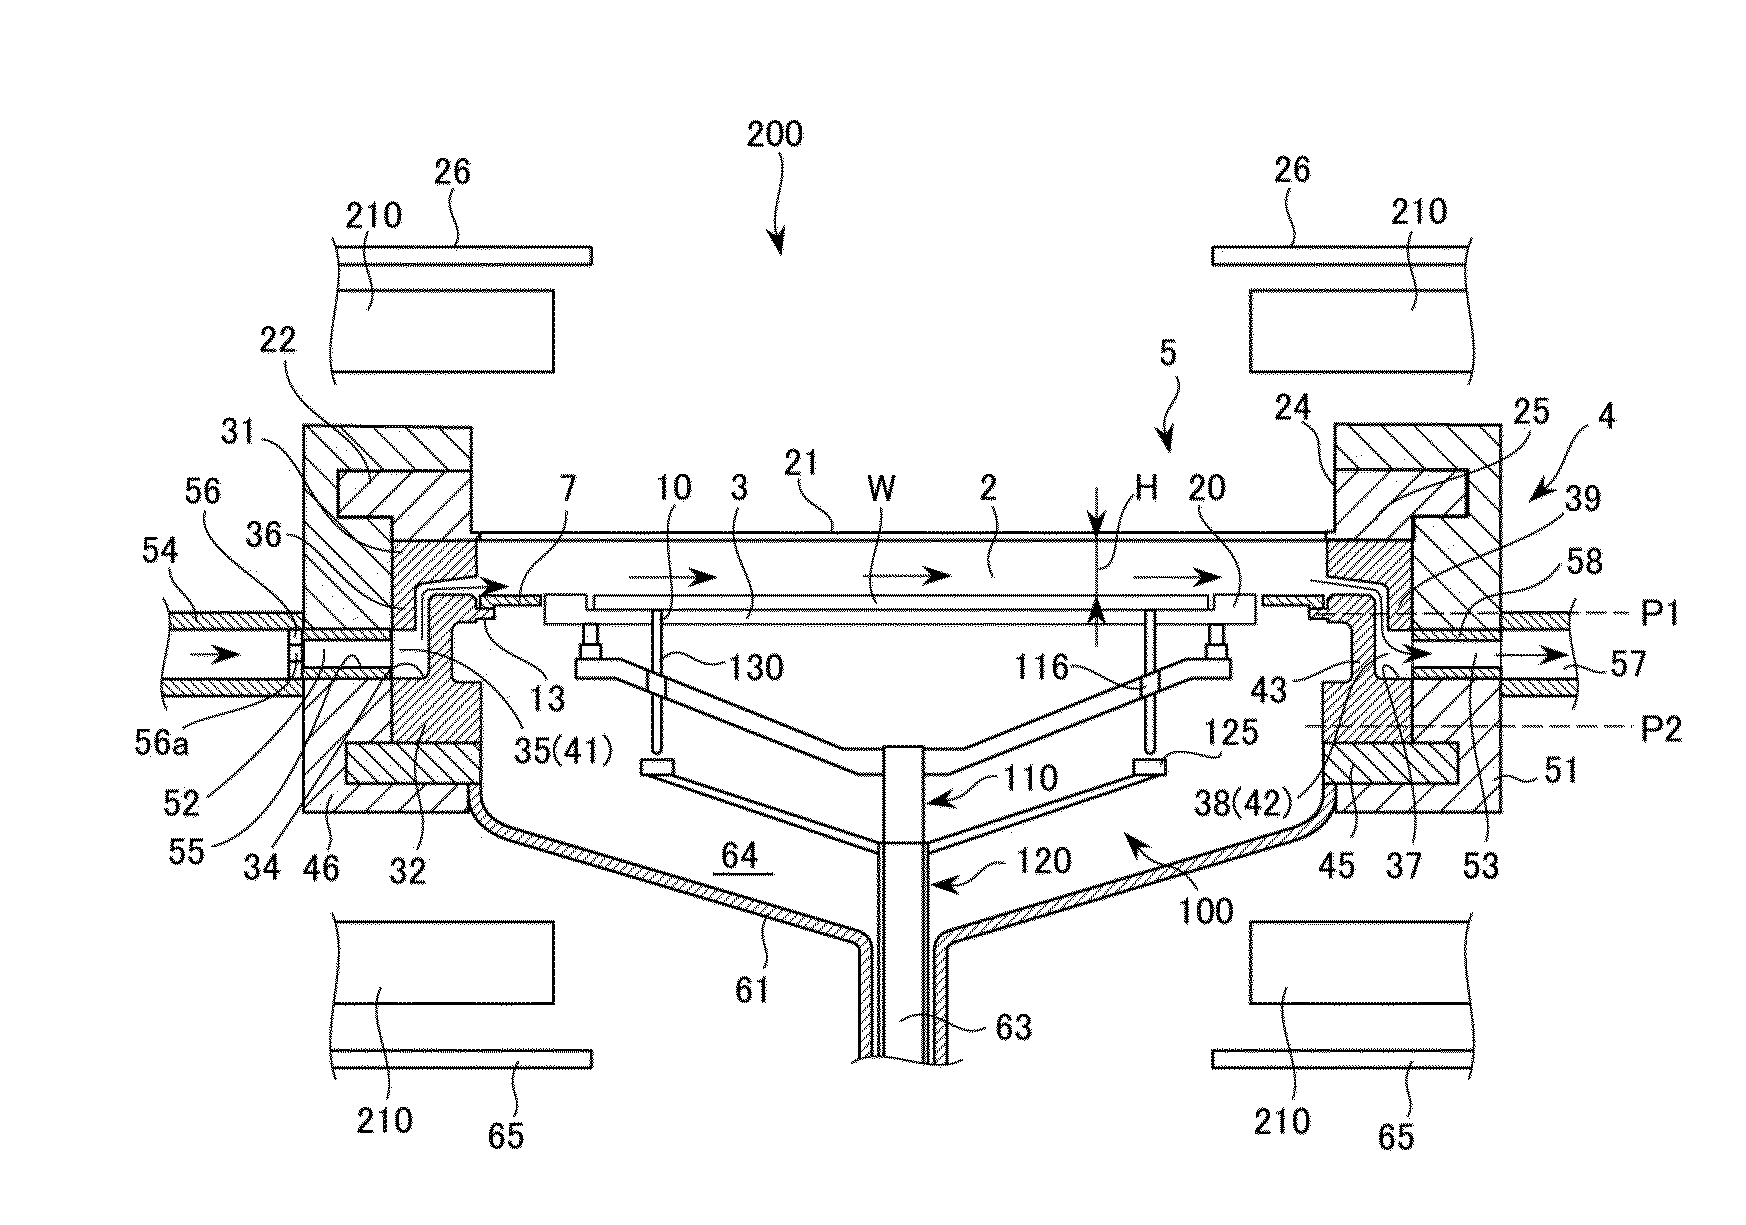 Susceptor Support Portion and Epitaxial Growth Apparatus Including Susceptor Support Portion